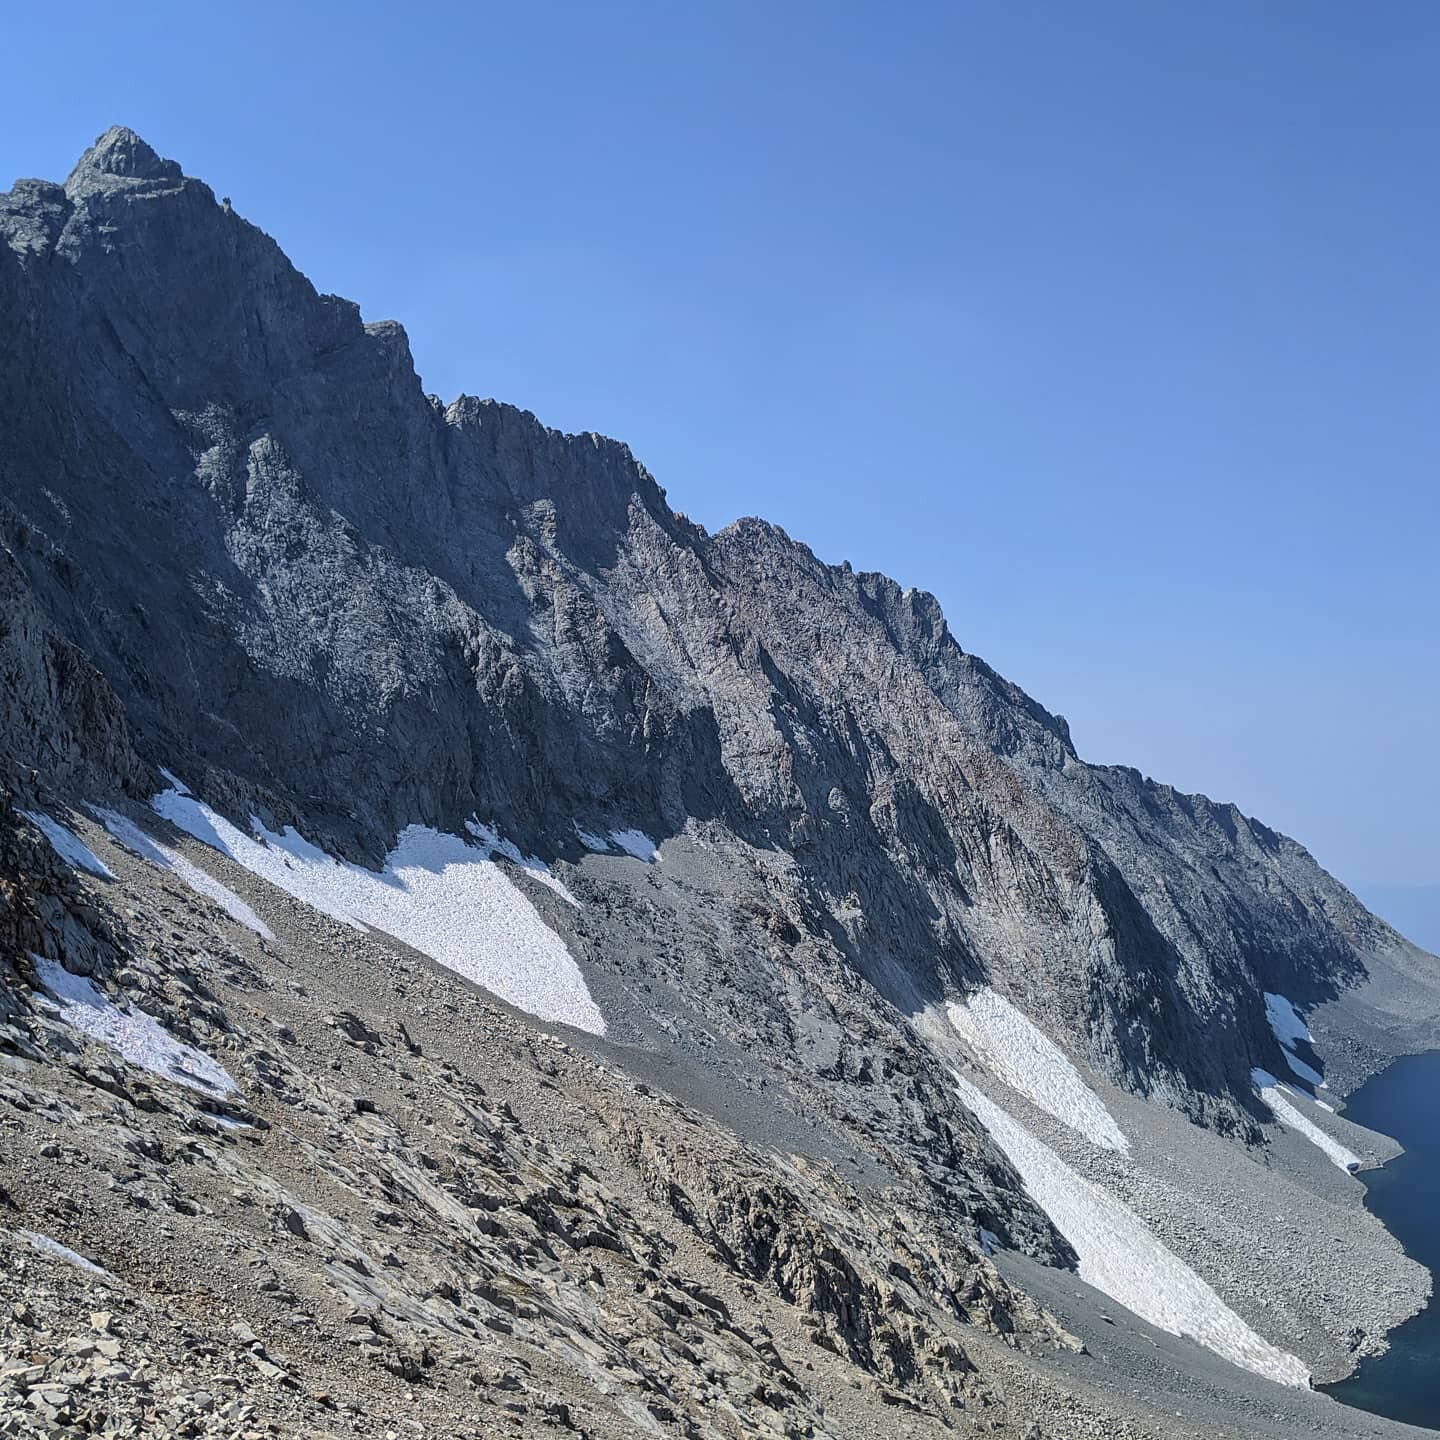 Even on a day hazy with wildfire smoke, Black Kaweah is an impressive pile of rocks. Like other peaks in the Kaweah range, it is known for steep and loose slopes. It&nbsp;has a local magnetic disturbance that can cause compasses to vary by up to eigh